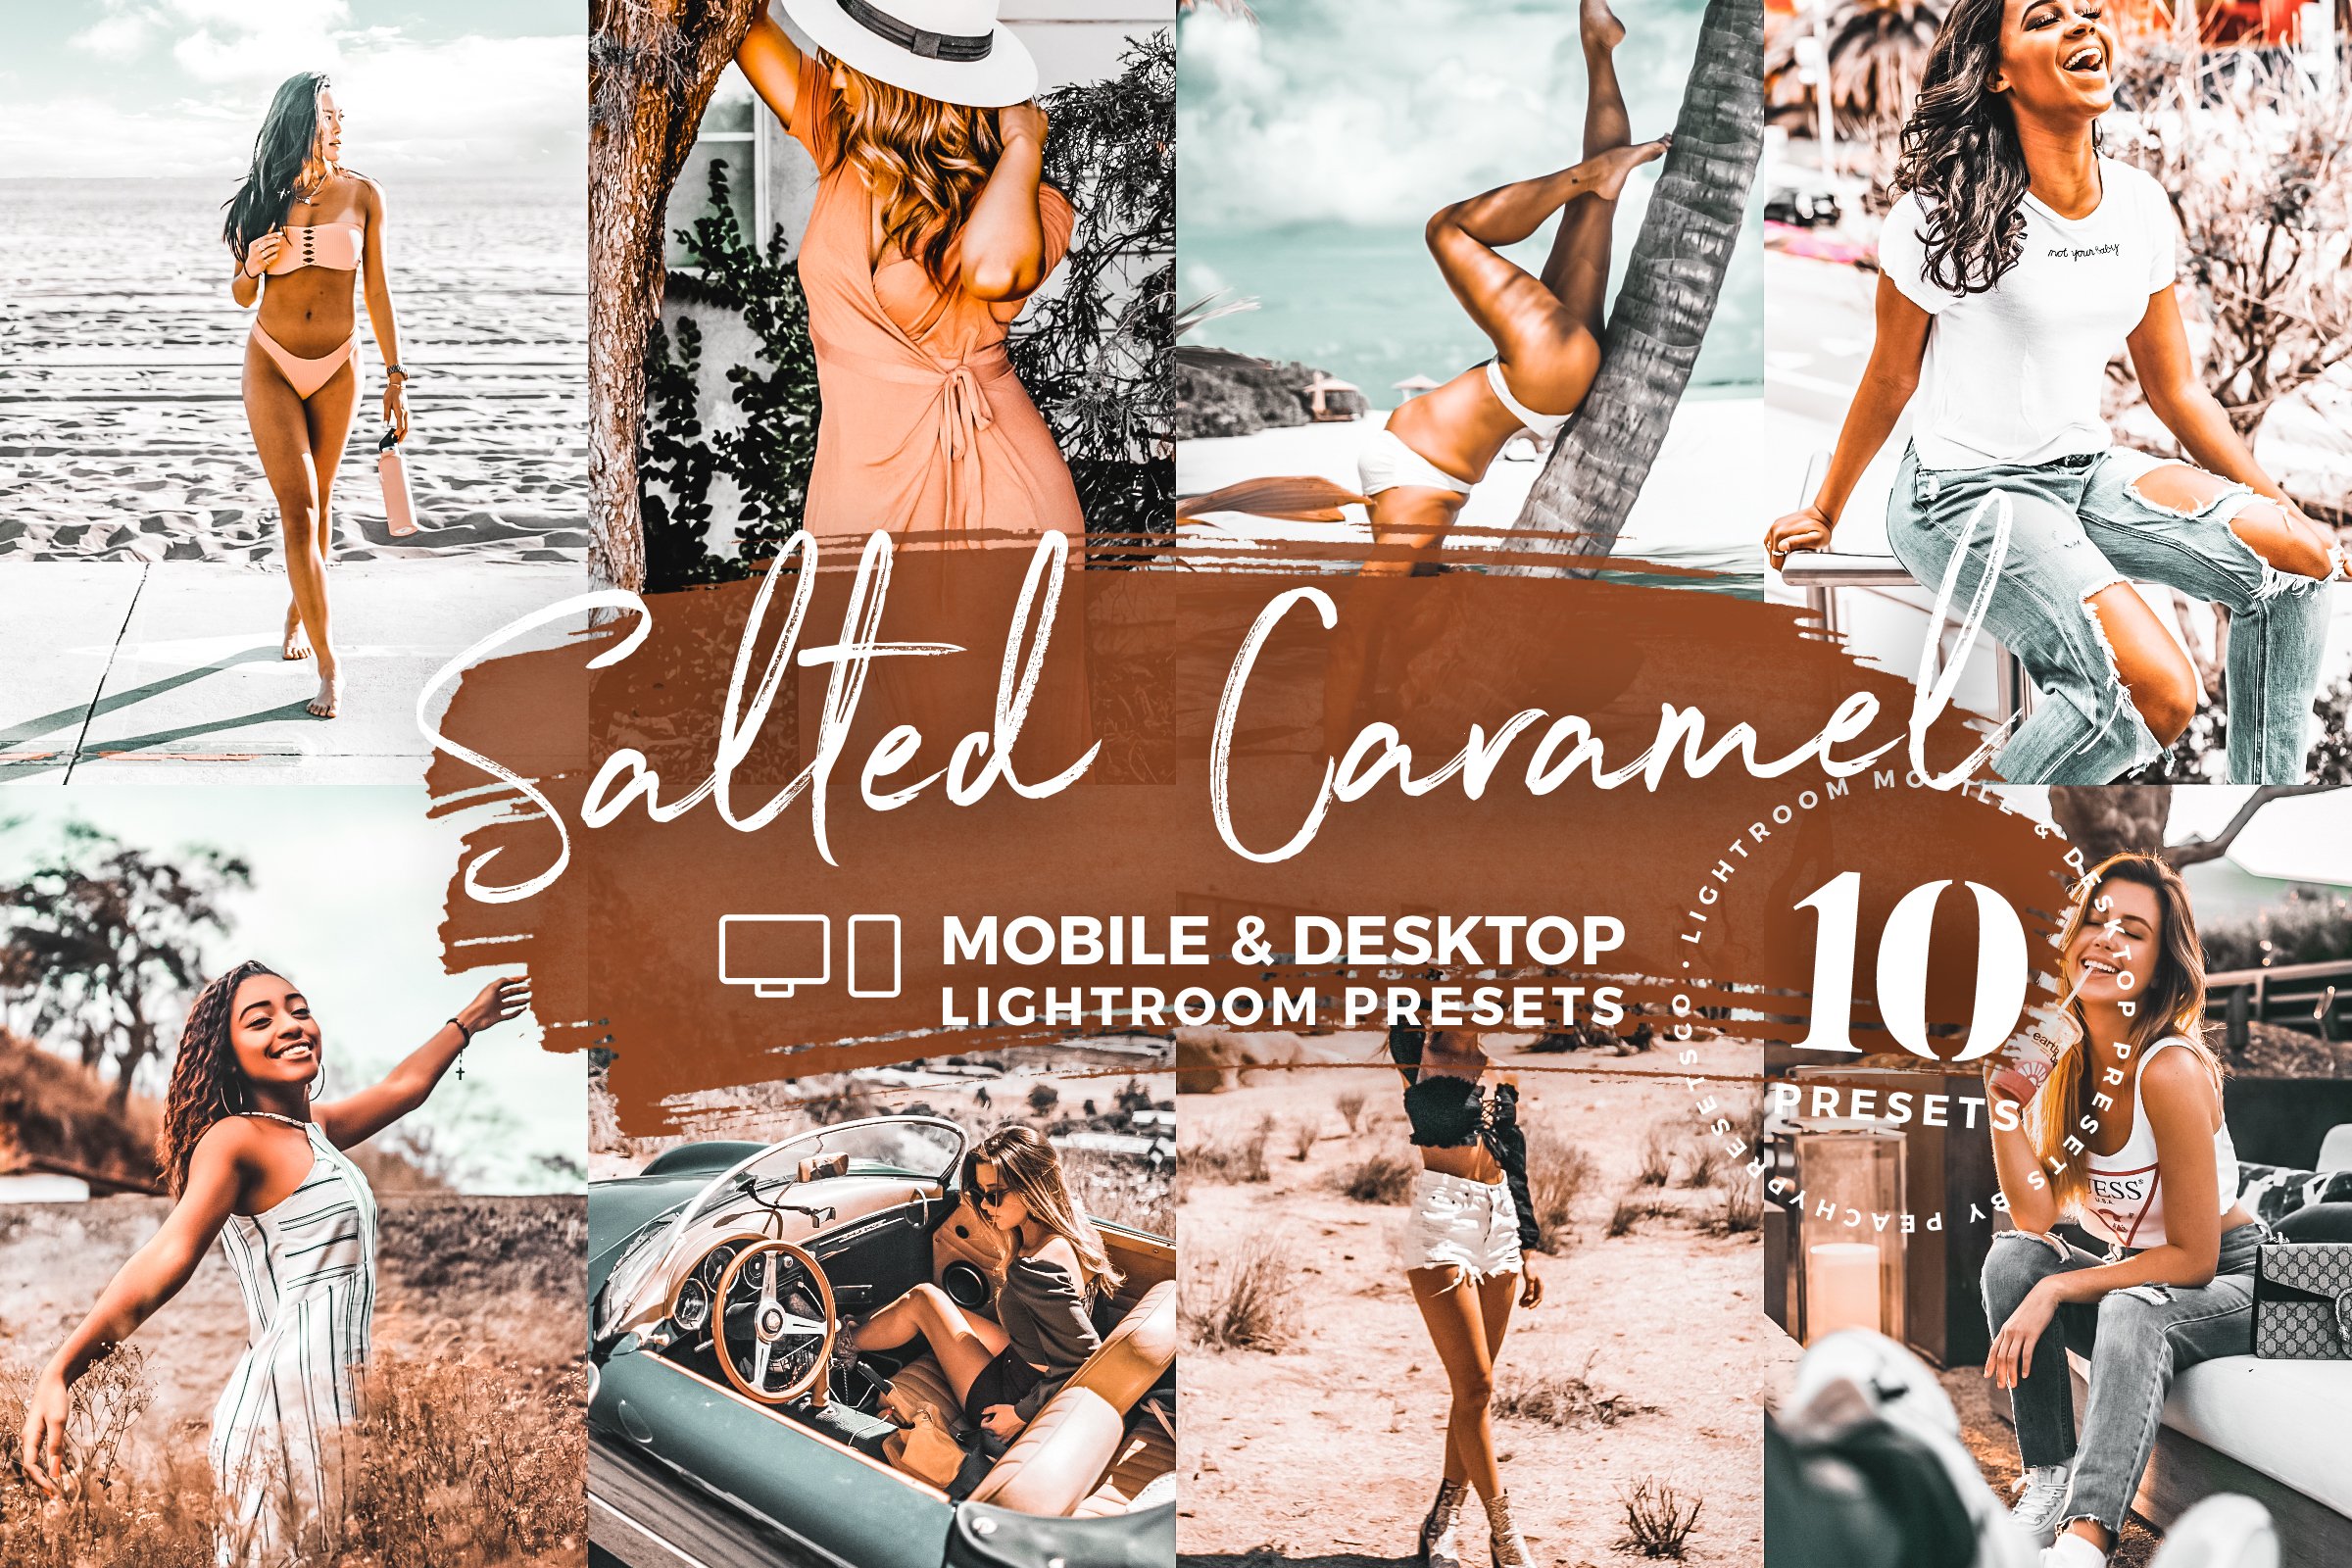 10 Salted Caramel Mobile Presetscover image.